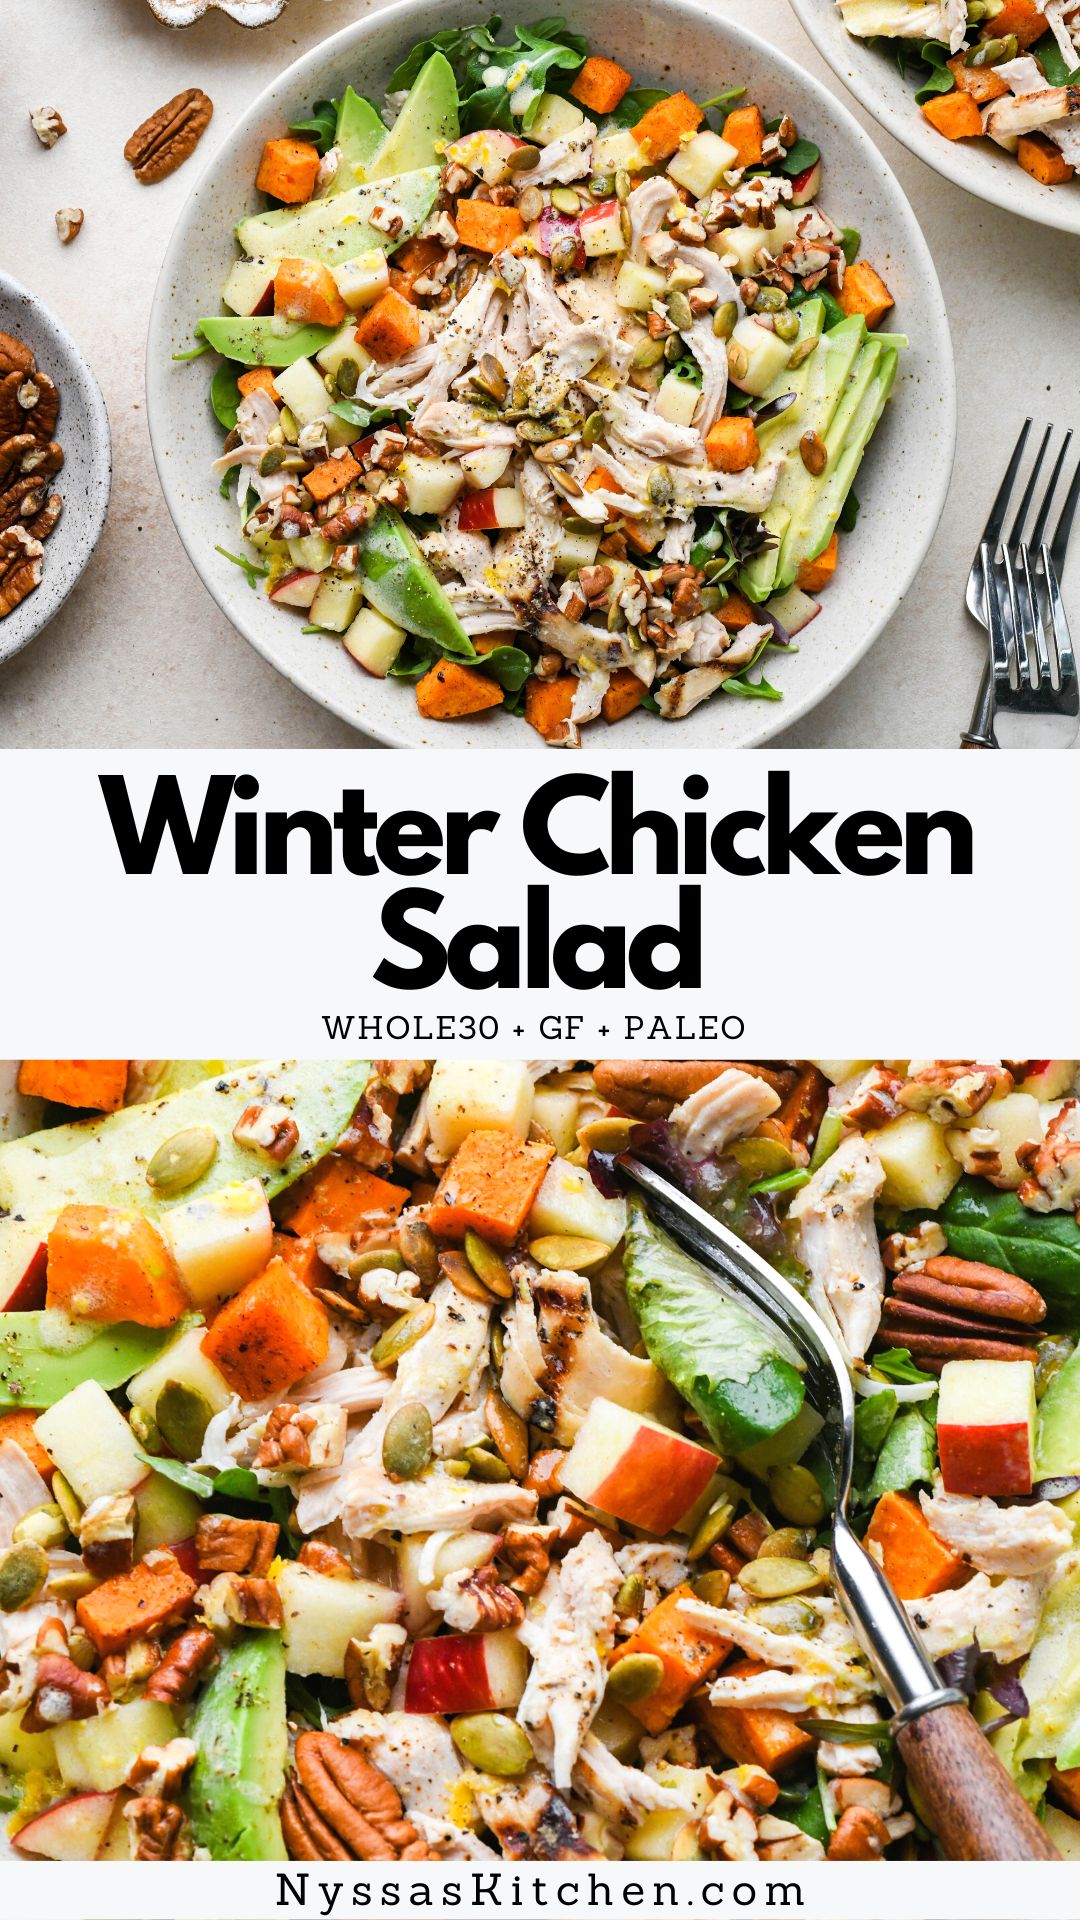 This winter chicken salad is the best salad for those moments during the colder months when you crave something fresh but hearty and filling. Made with your favorite salad greens, chicken breast, roasted sweet potatoes, apples, avocado, nuts, and a bright homemade lemony salad dressing. Easy to throw together and full of flavor and phenomenal texture! Gluten free, paleo, dairy free, & easily made Whole30 compatible.